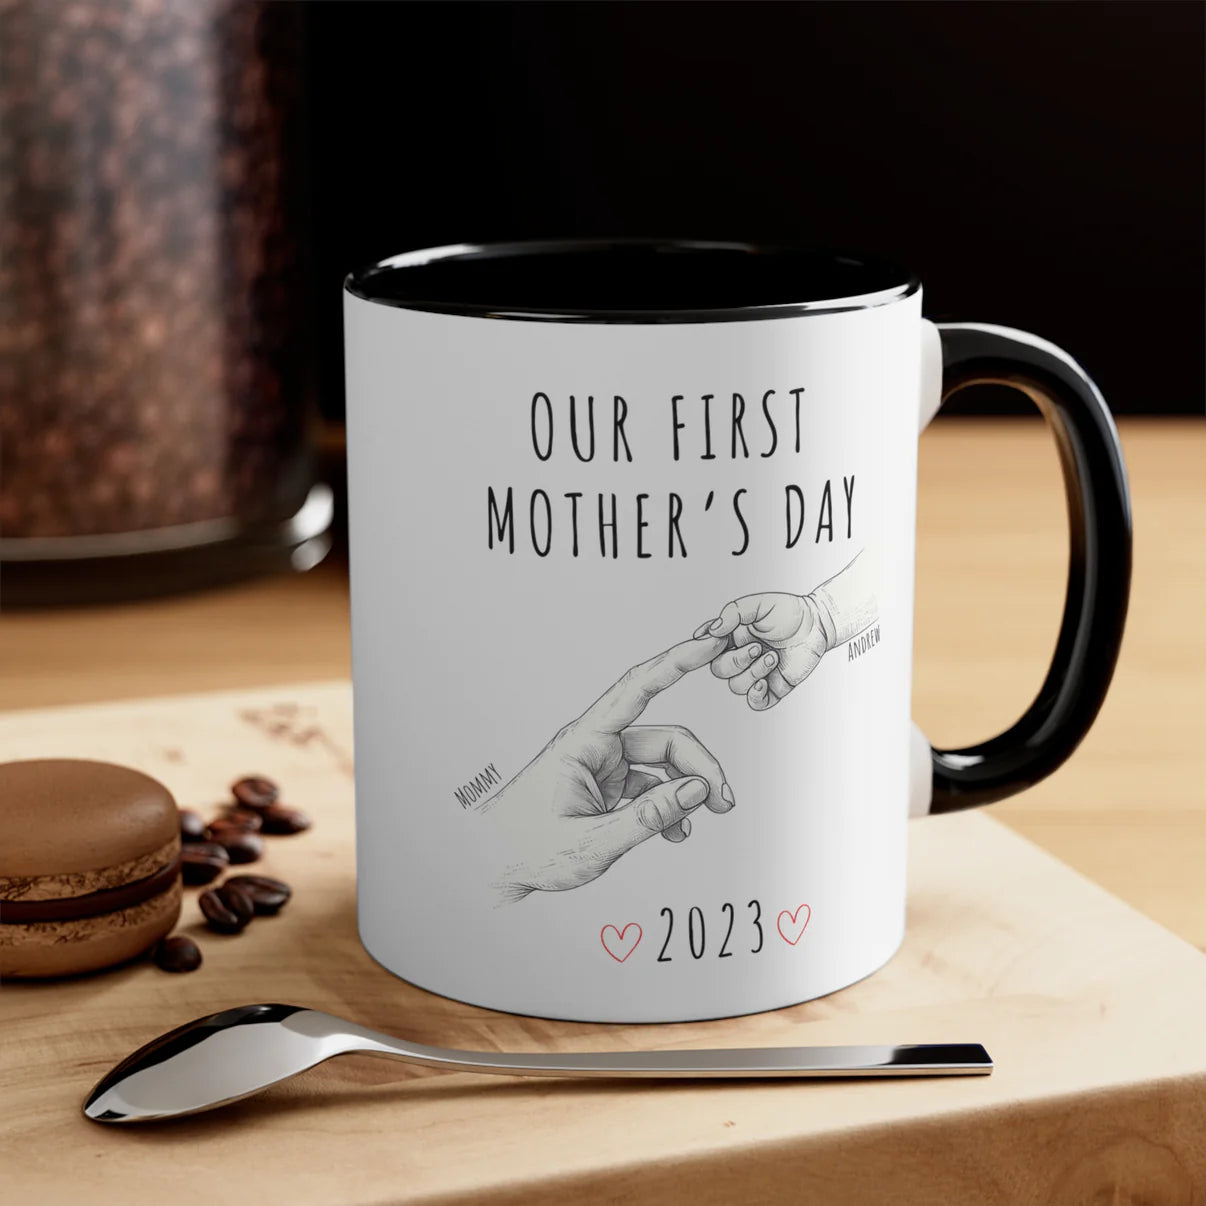 New Mom Gifts